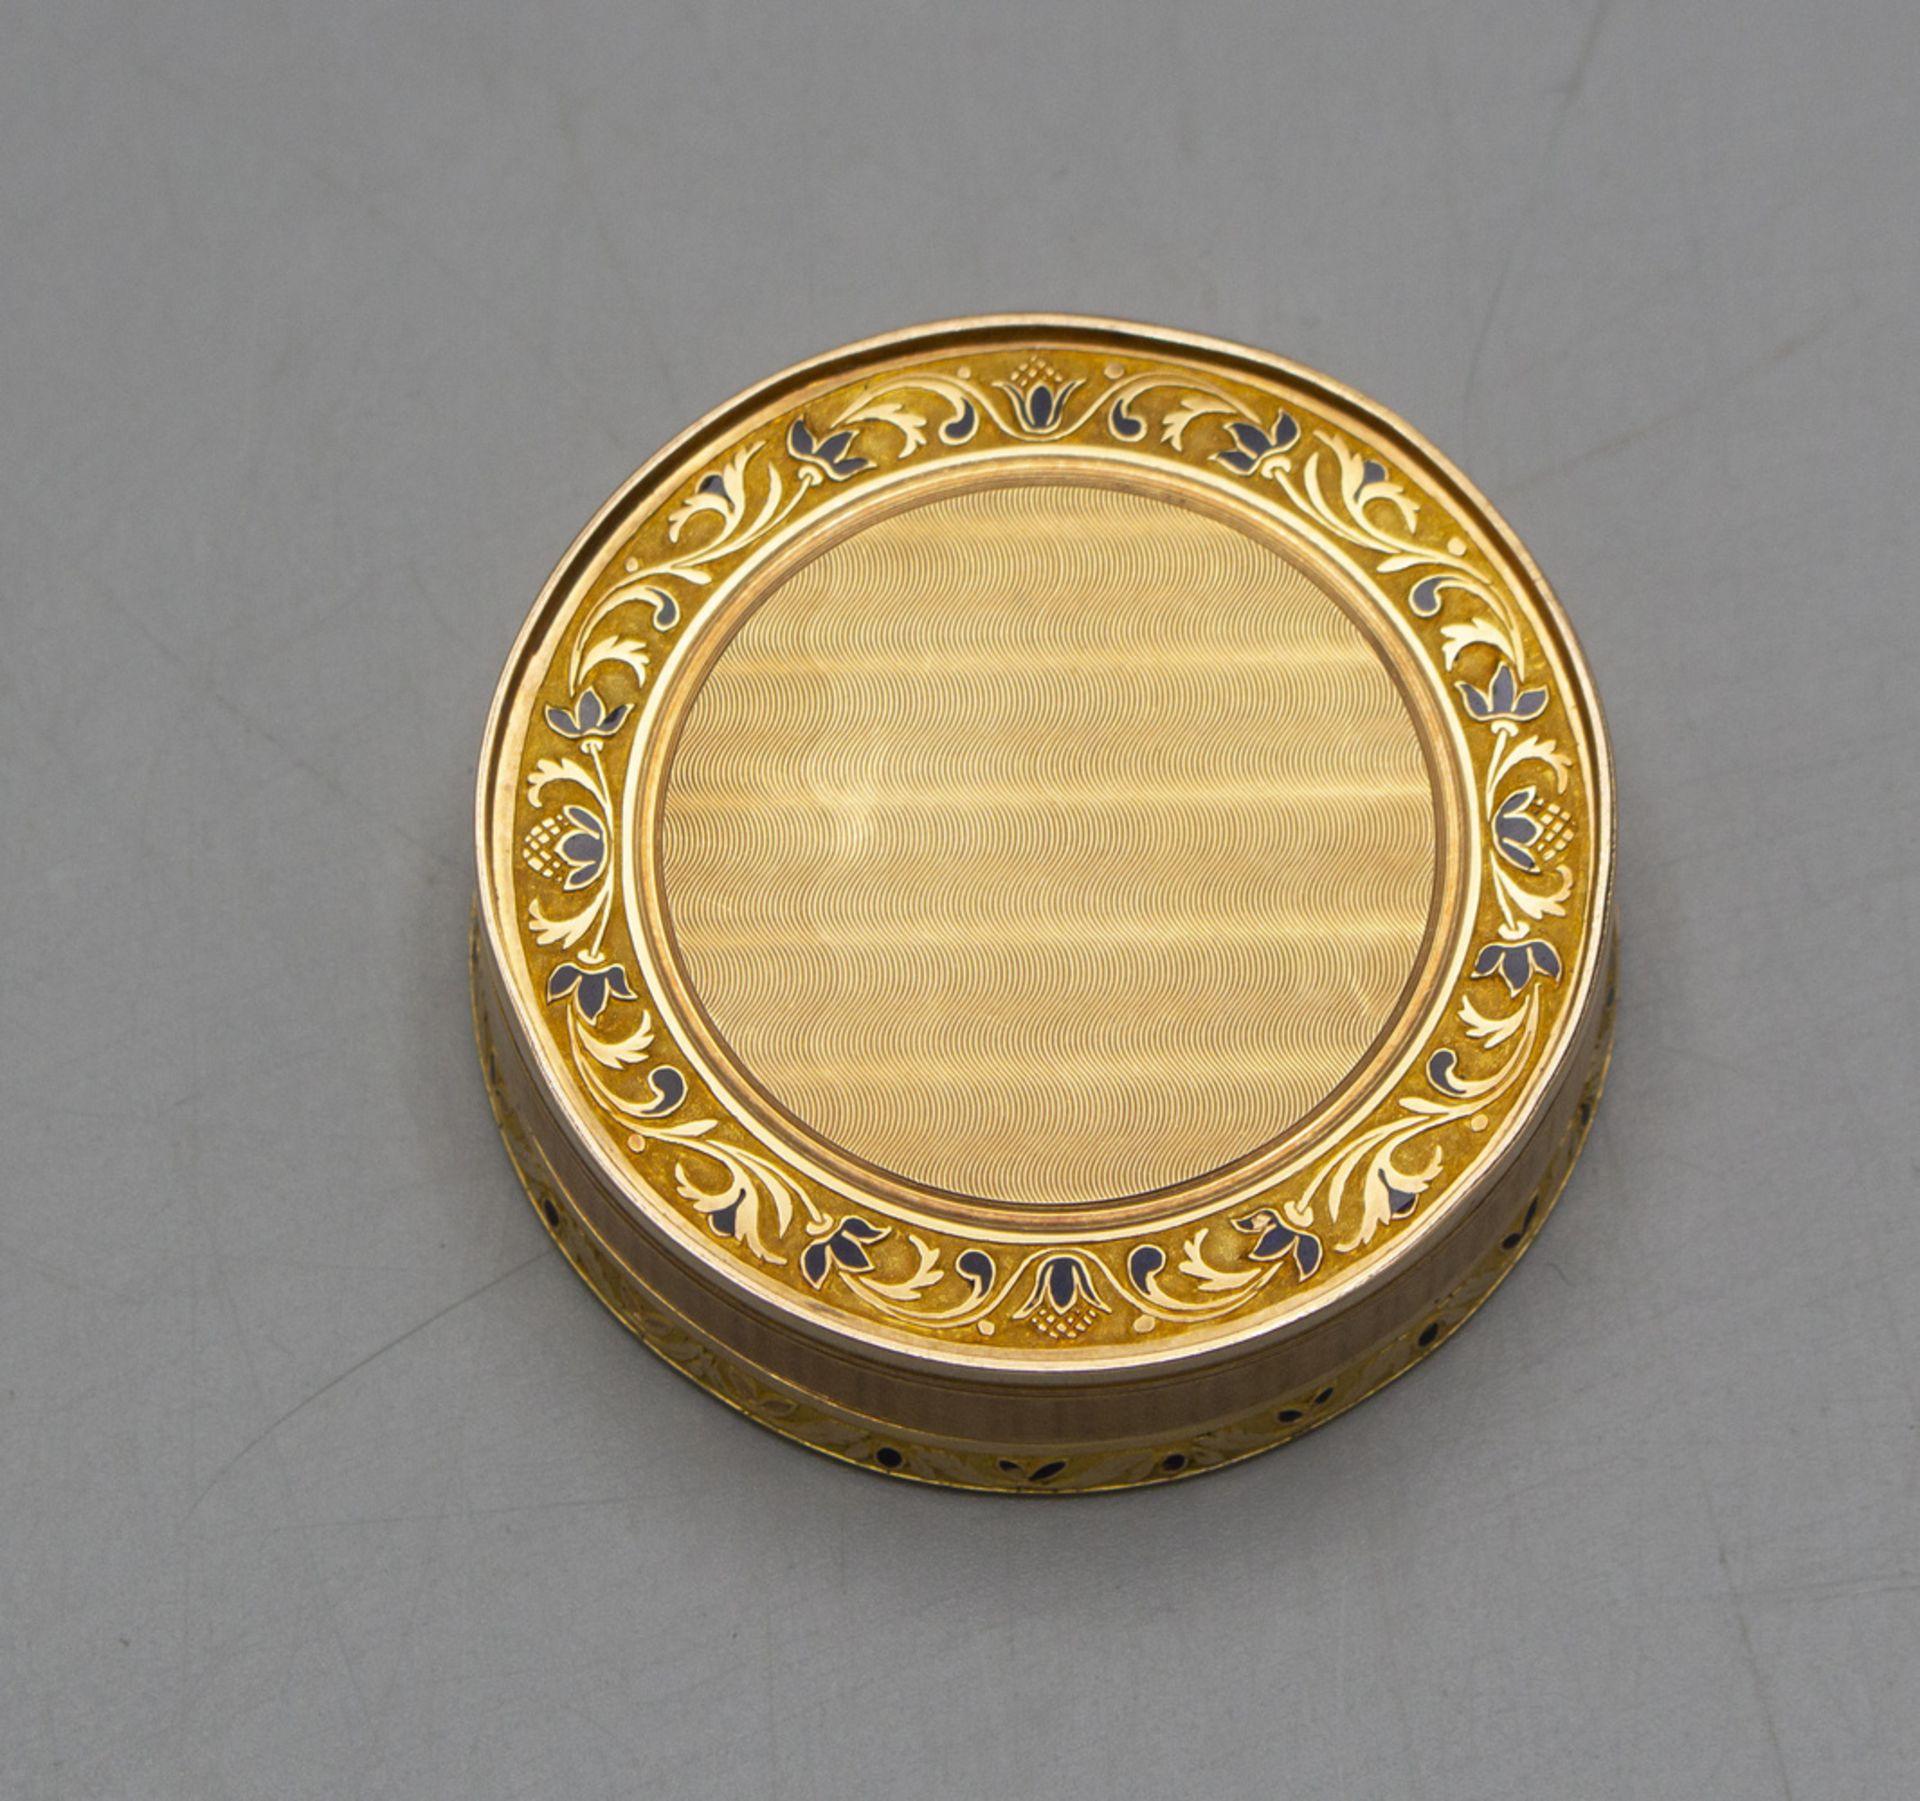 Gold Tabatiere / An 18 ct gold snuff box, Frankreich, um 1800 - Image 2 of 8